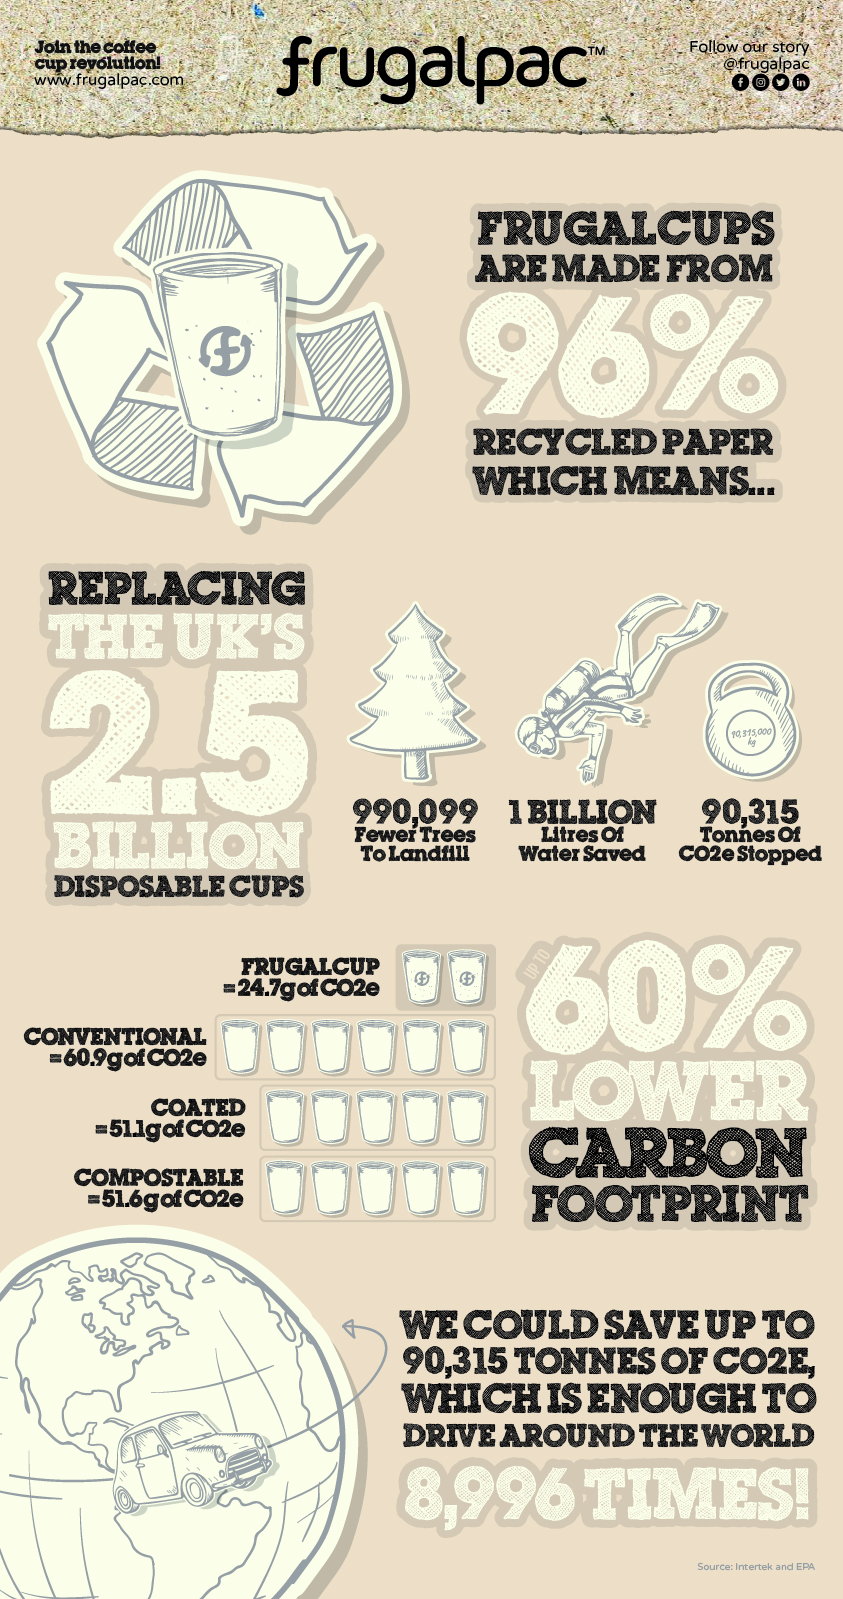 New coffee cup study shows recycled paper coffee cup has 60% lower carbon footprint than normal cups and would save more than 200 billion litres of water and up to 200 million trees a year